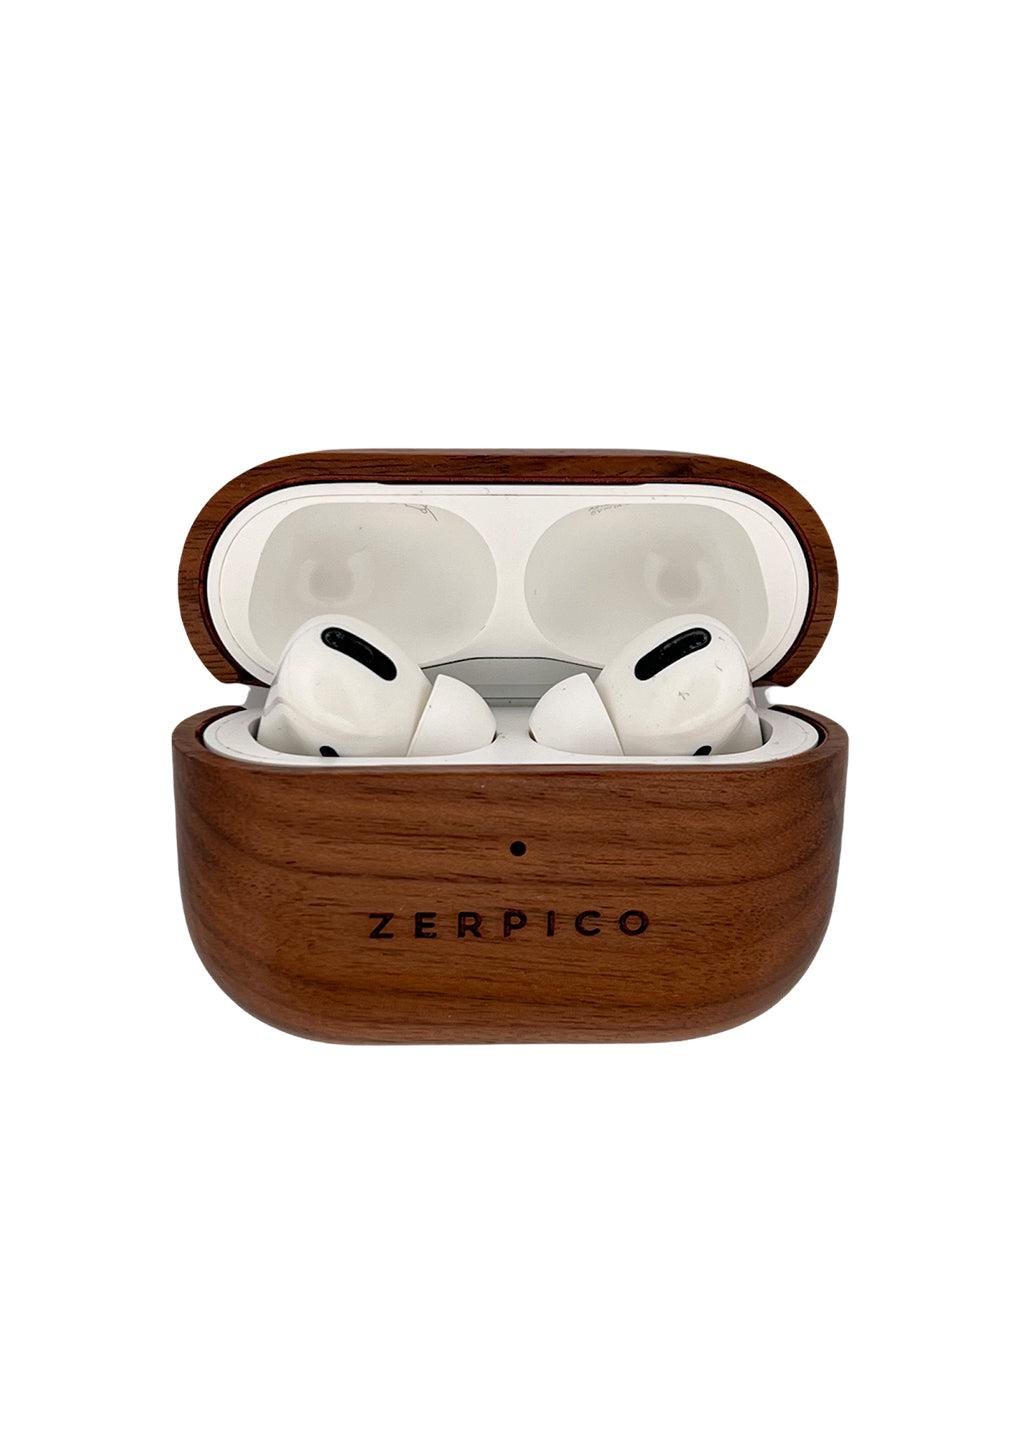 Zerpico Wooden Airpods case. Studio shoot of the Apple Airpods pro wooden case.